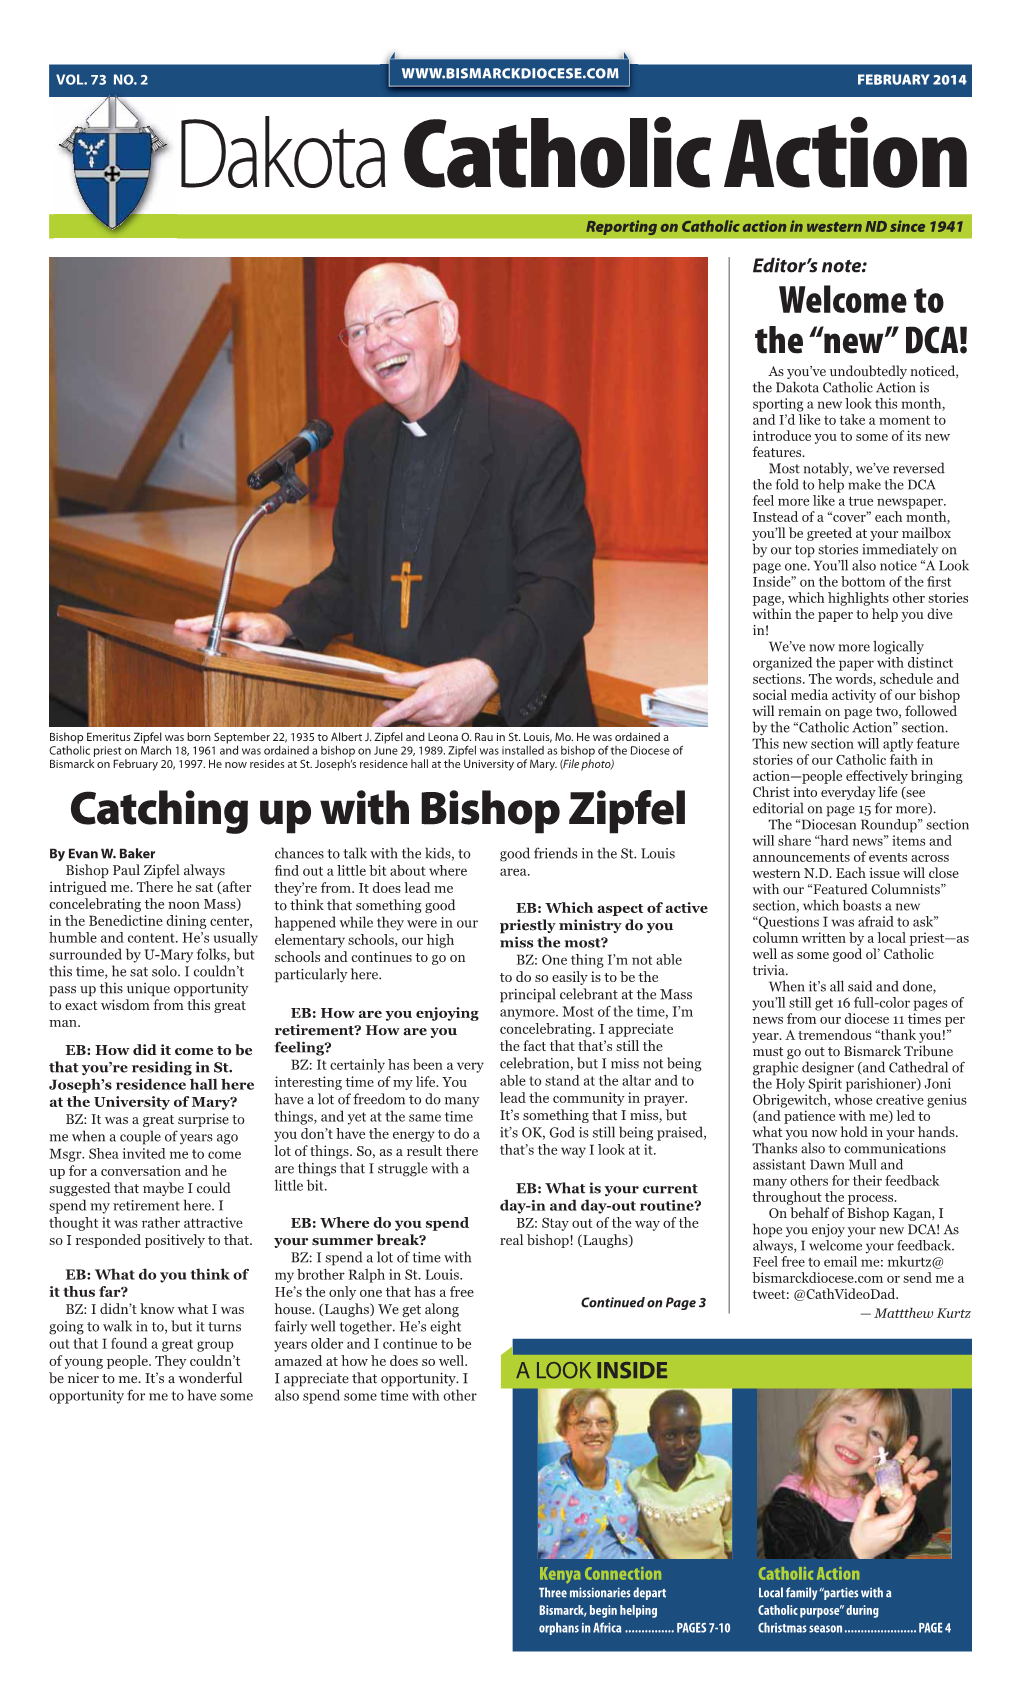 Catching up with Bishop Zipfel the “Diocesan Roundup” Section Will Share “Hard News” Items and by Evan W